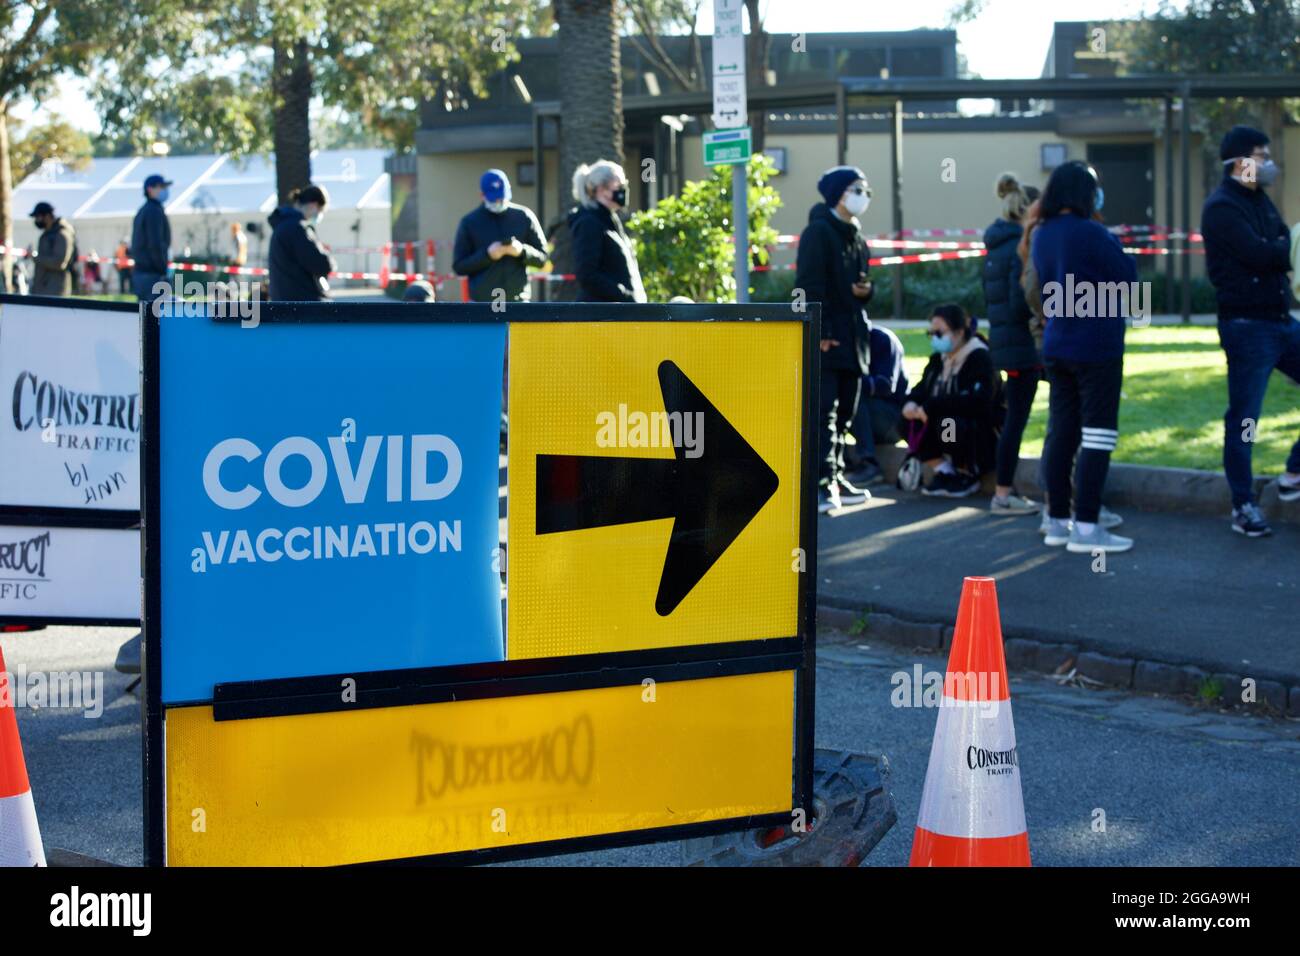 MELBOUR, AUSTRALIA - Aug 28, 2021: Covid sign and arrow with people lining up to get coronavirus vaccine at new walk-in covid-19 vaccination clinic at Stock Photo